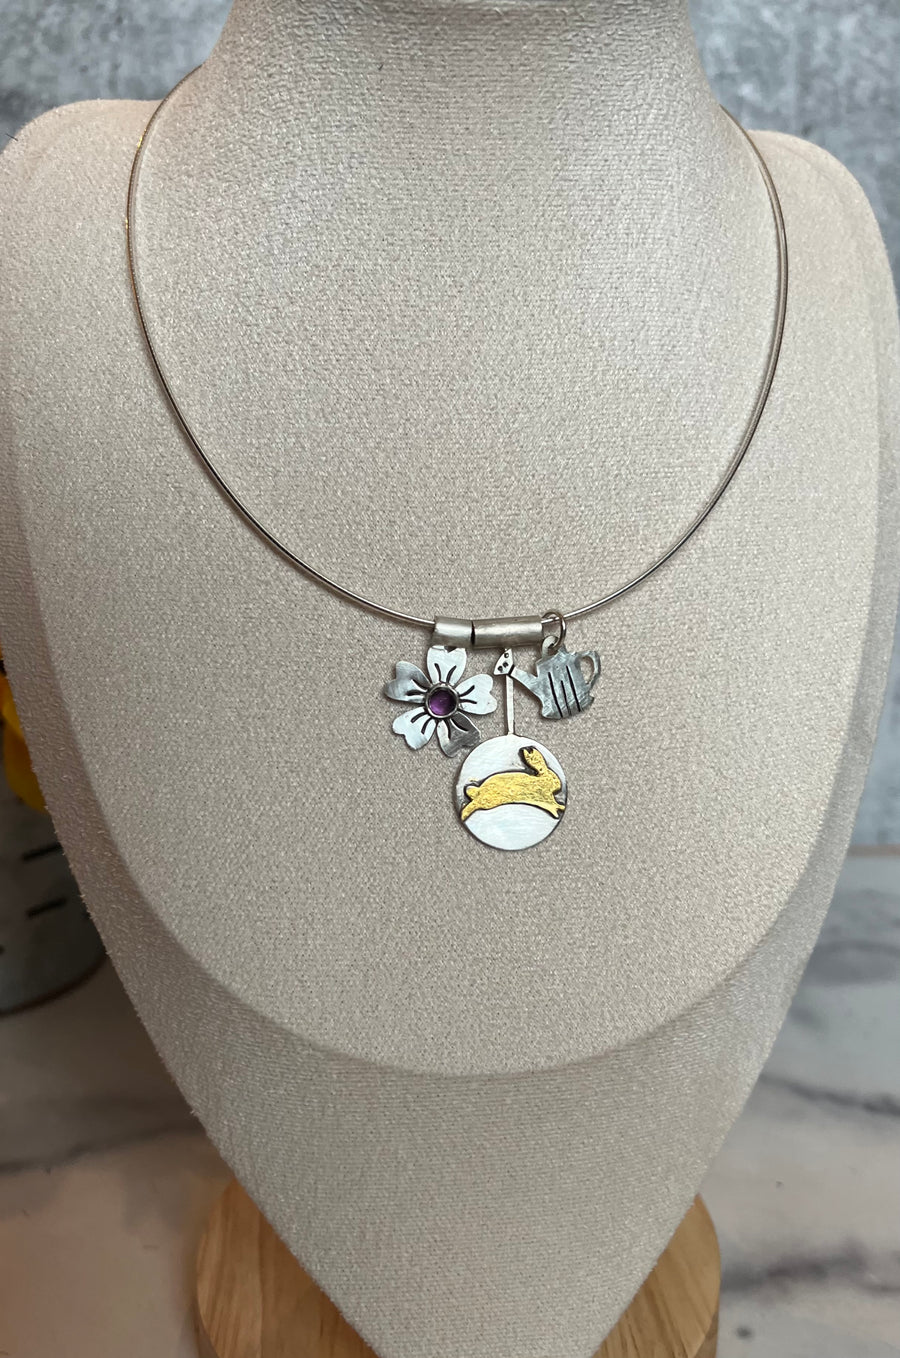 How Does Your Garden Grow - Golden Bunny Necklace - MARTINIJewels